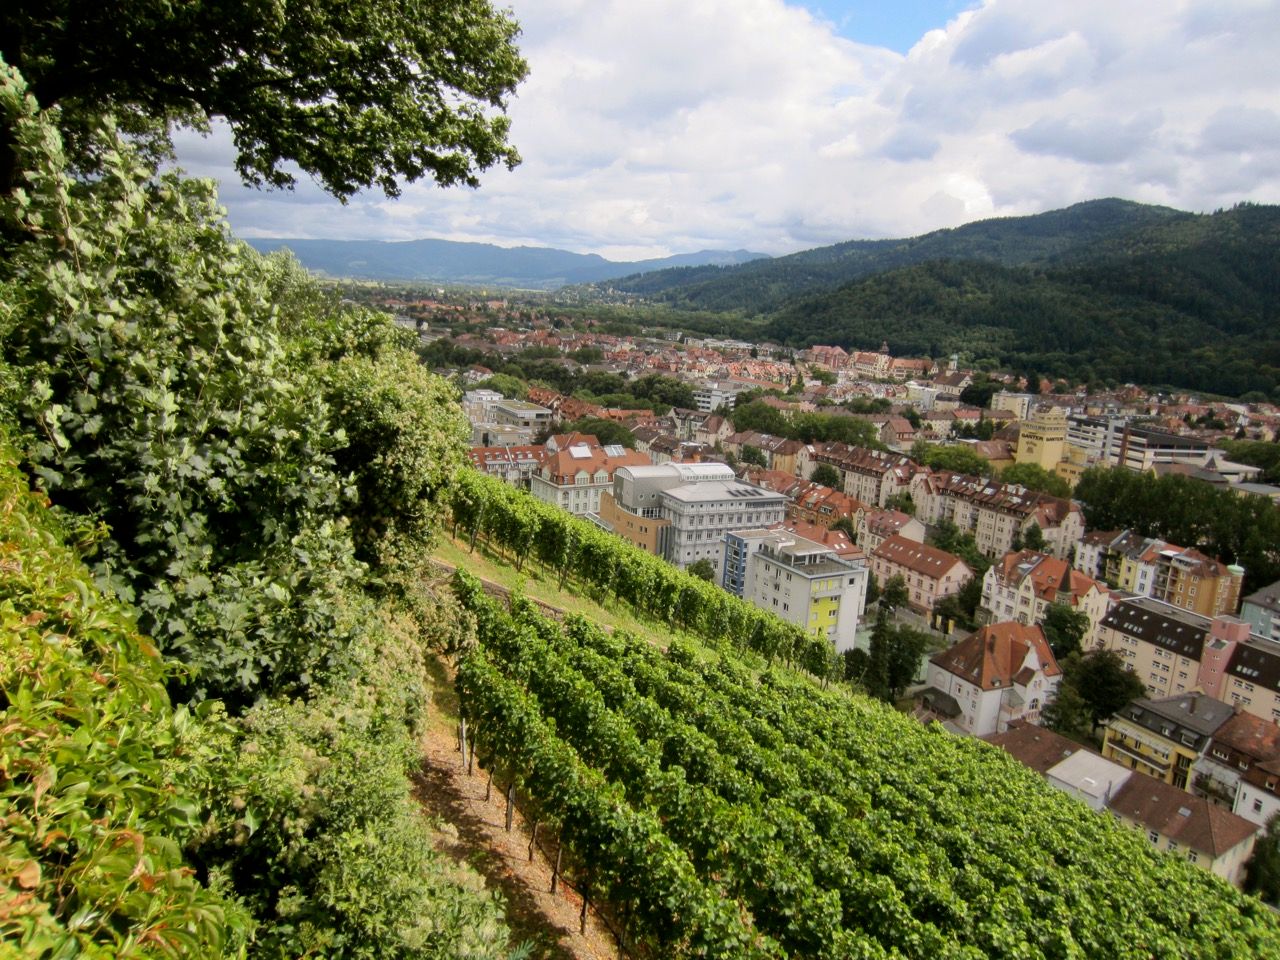 A scenic view of east Freiburg from atop a vineyeard-covered hill.